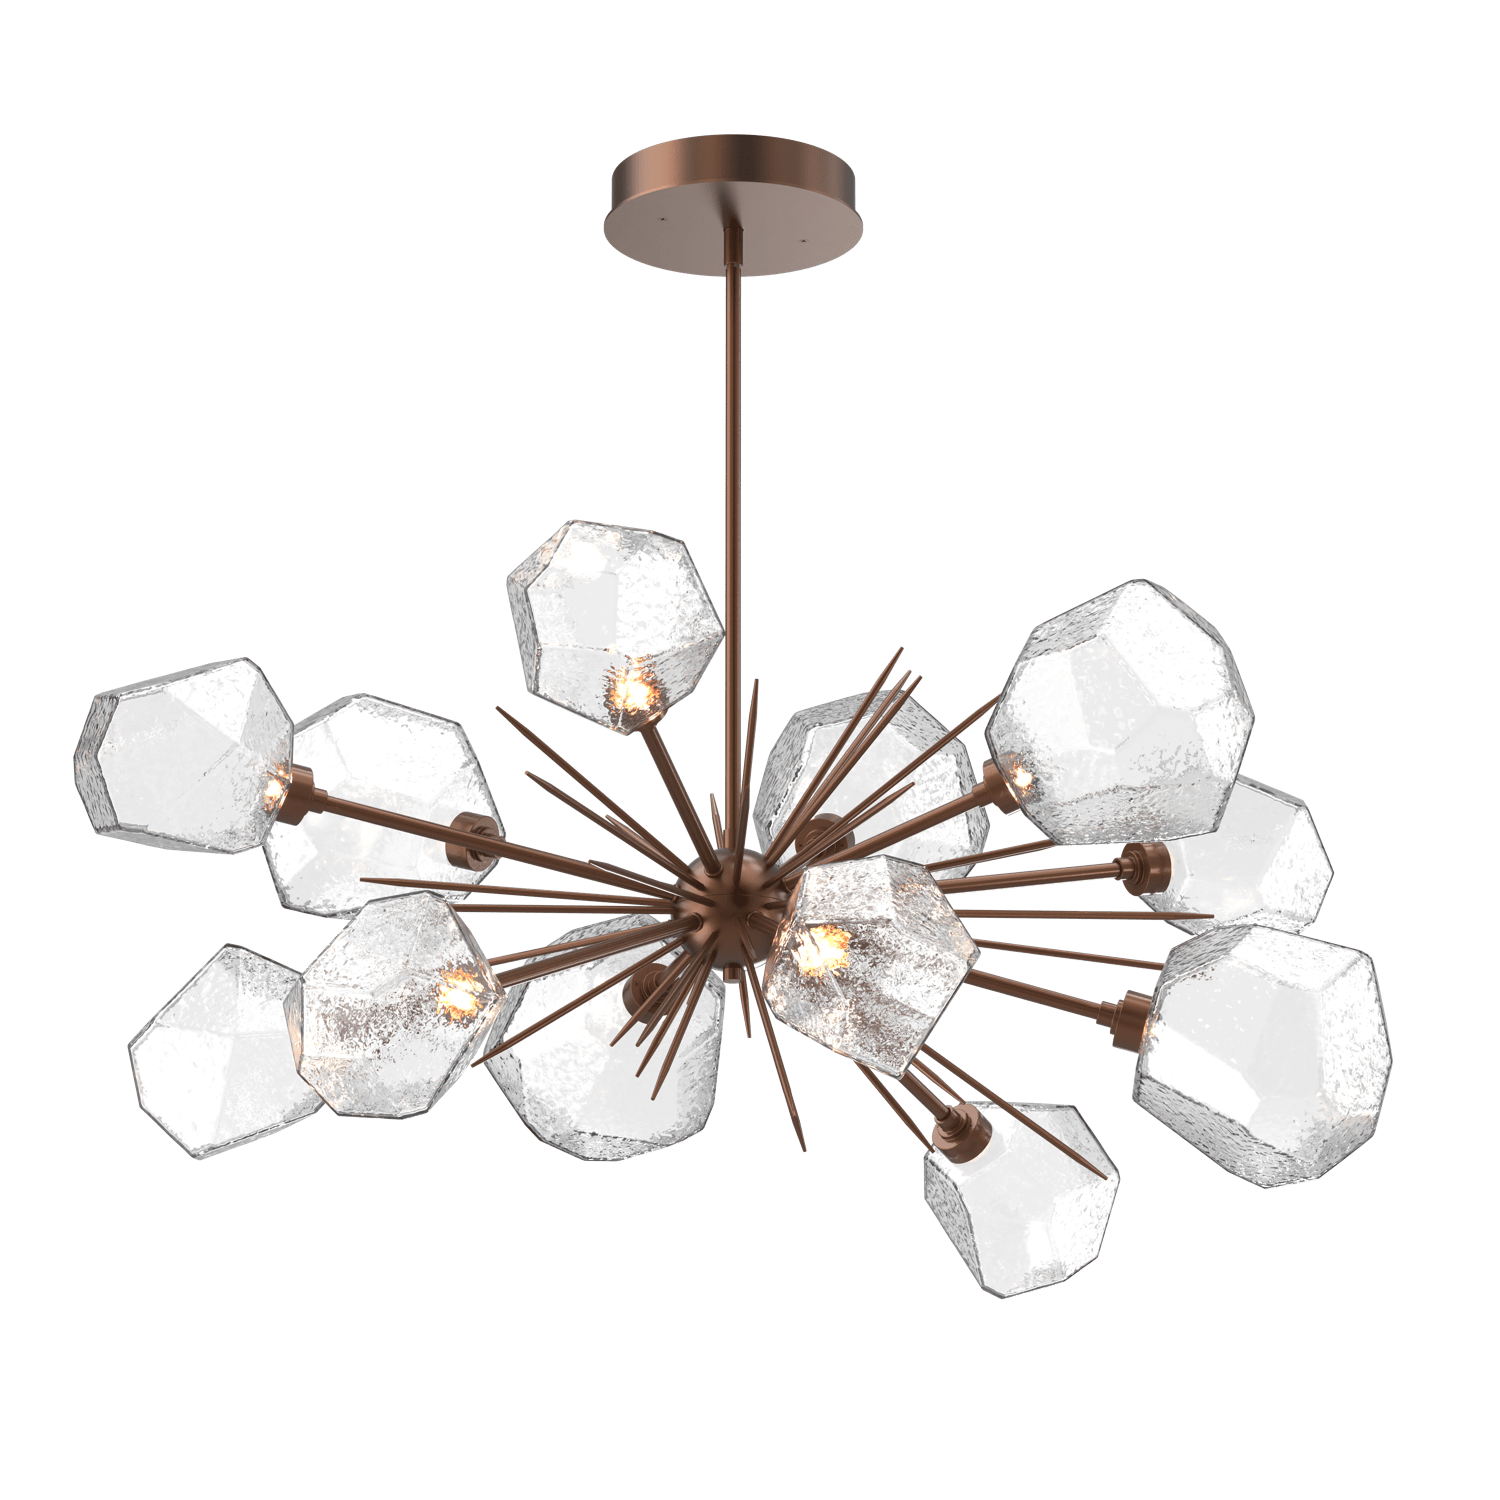 PLB0039-0D-BB-C-Hammerton-Studio-Gem-43-inch-oval-starburst-chandelier-with-burnished-bronze-finish-and-clear-blown-glass-shades-and-LED-lamping